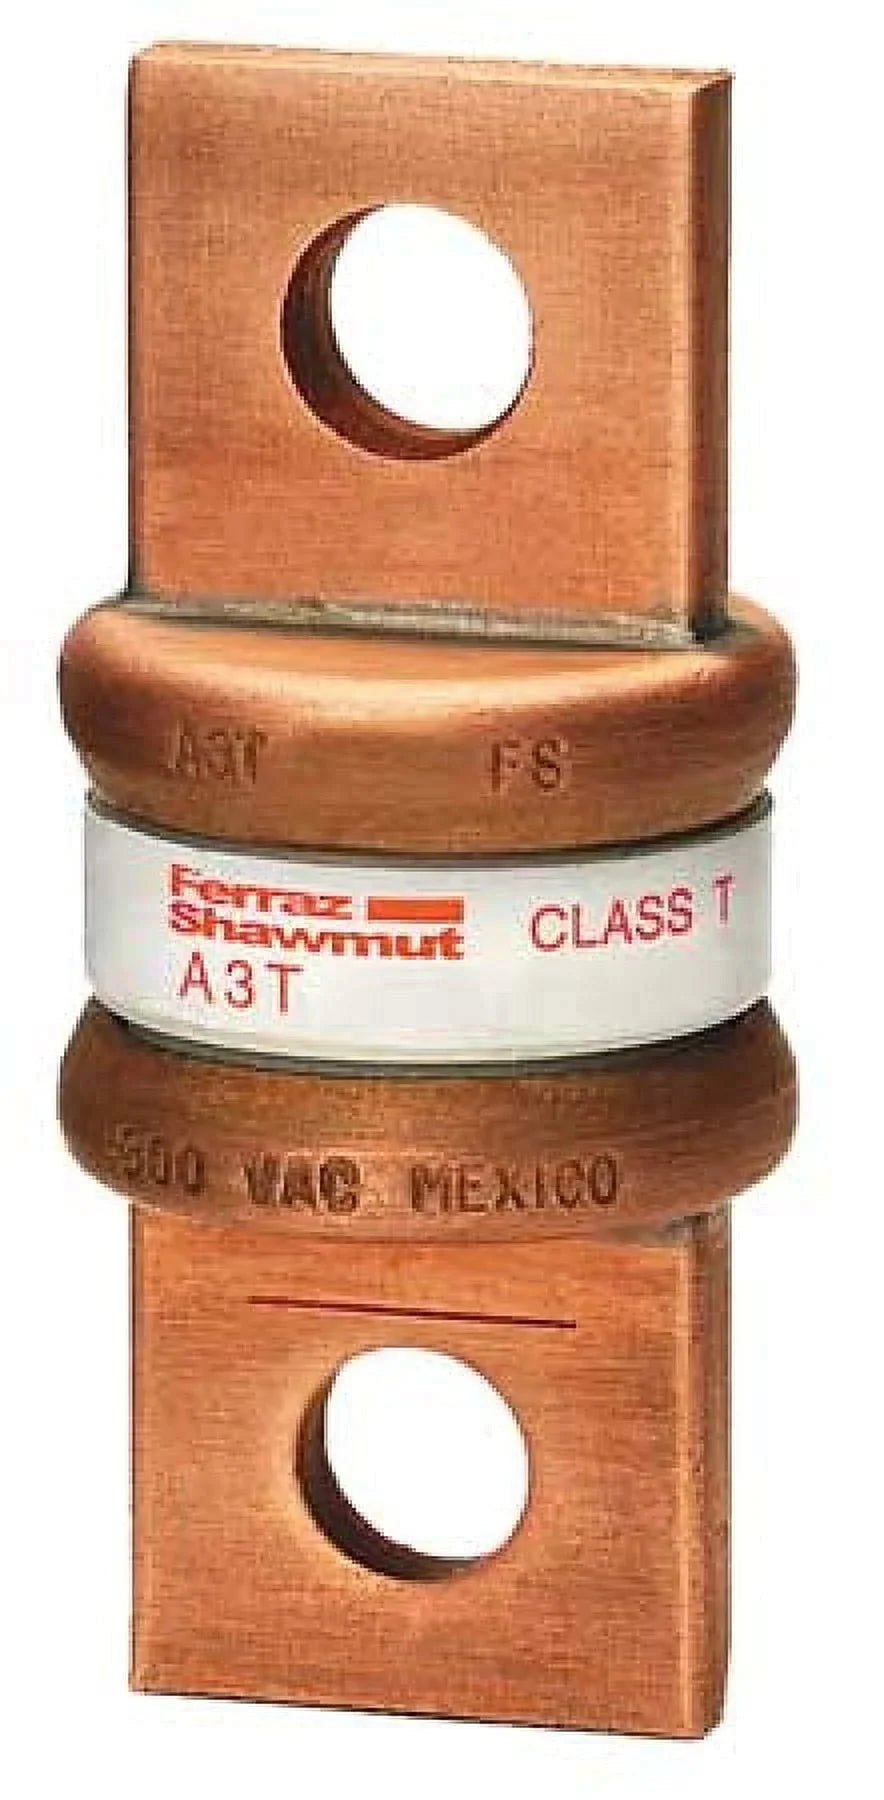 Fuse Amp-Trap® 300V 250A Fast-Acting Class T A3T Series